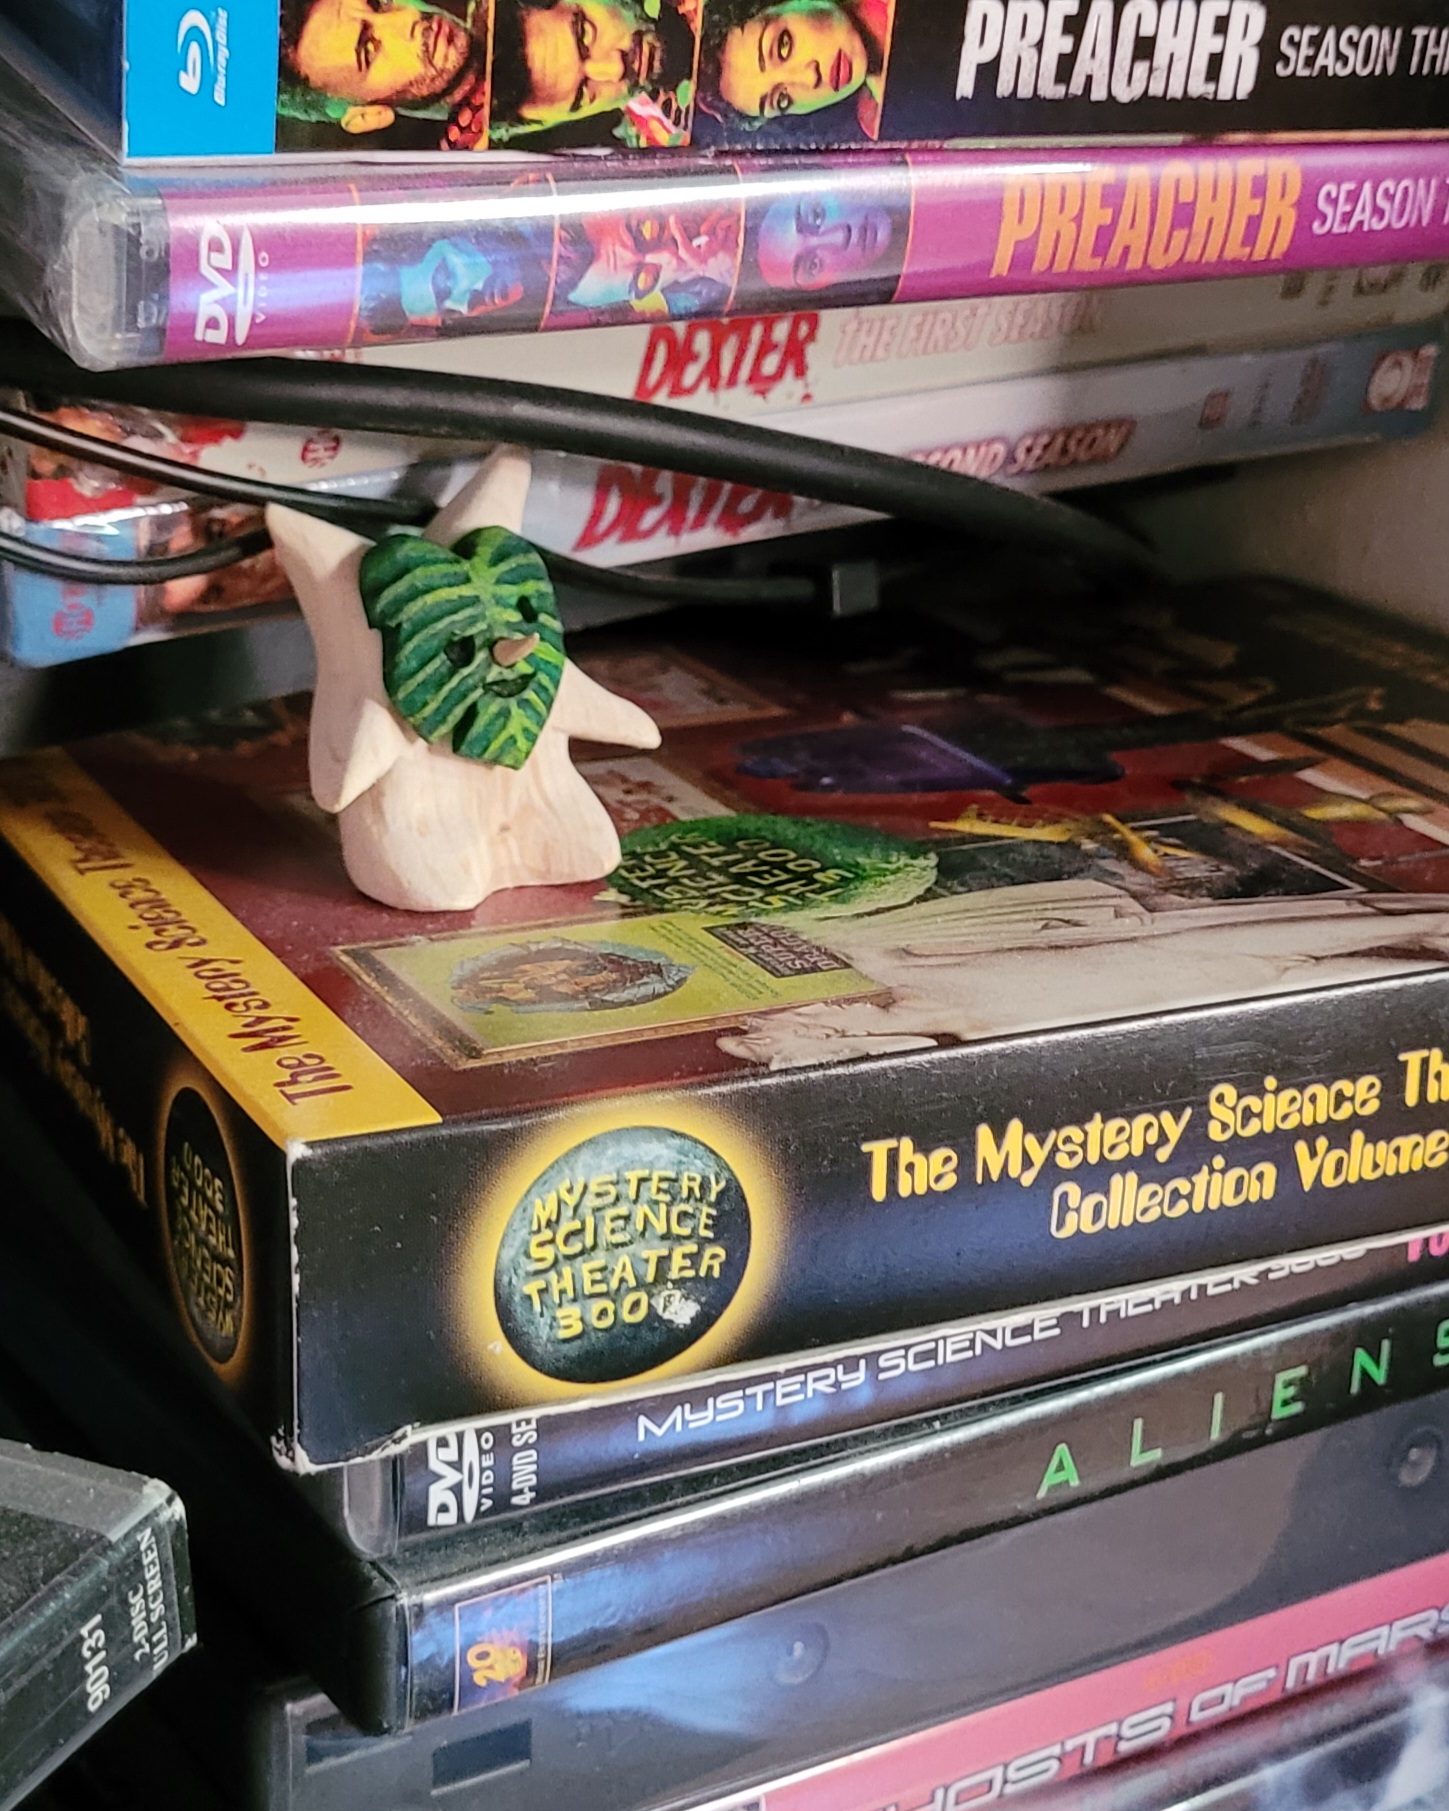 the finished korok sitting on a pile of DVDs